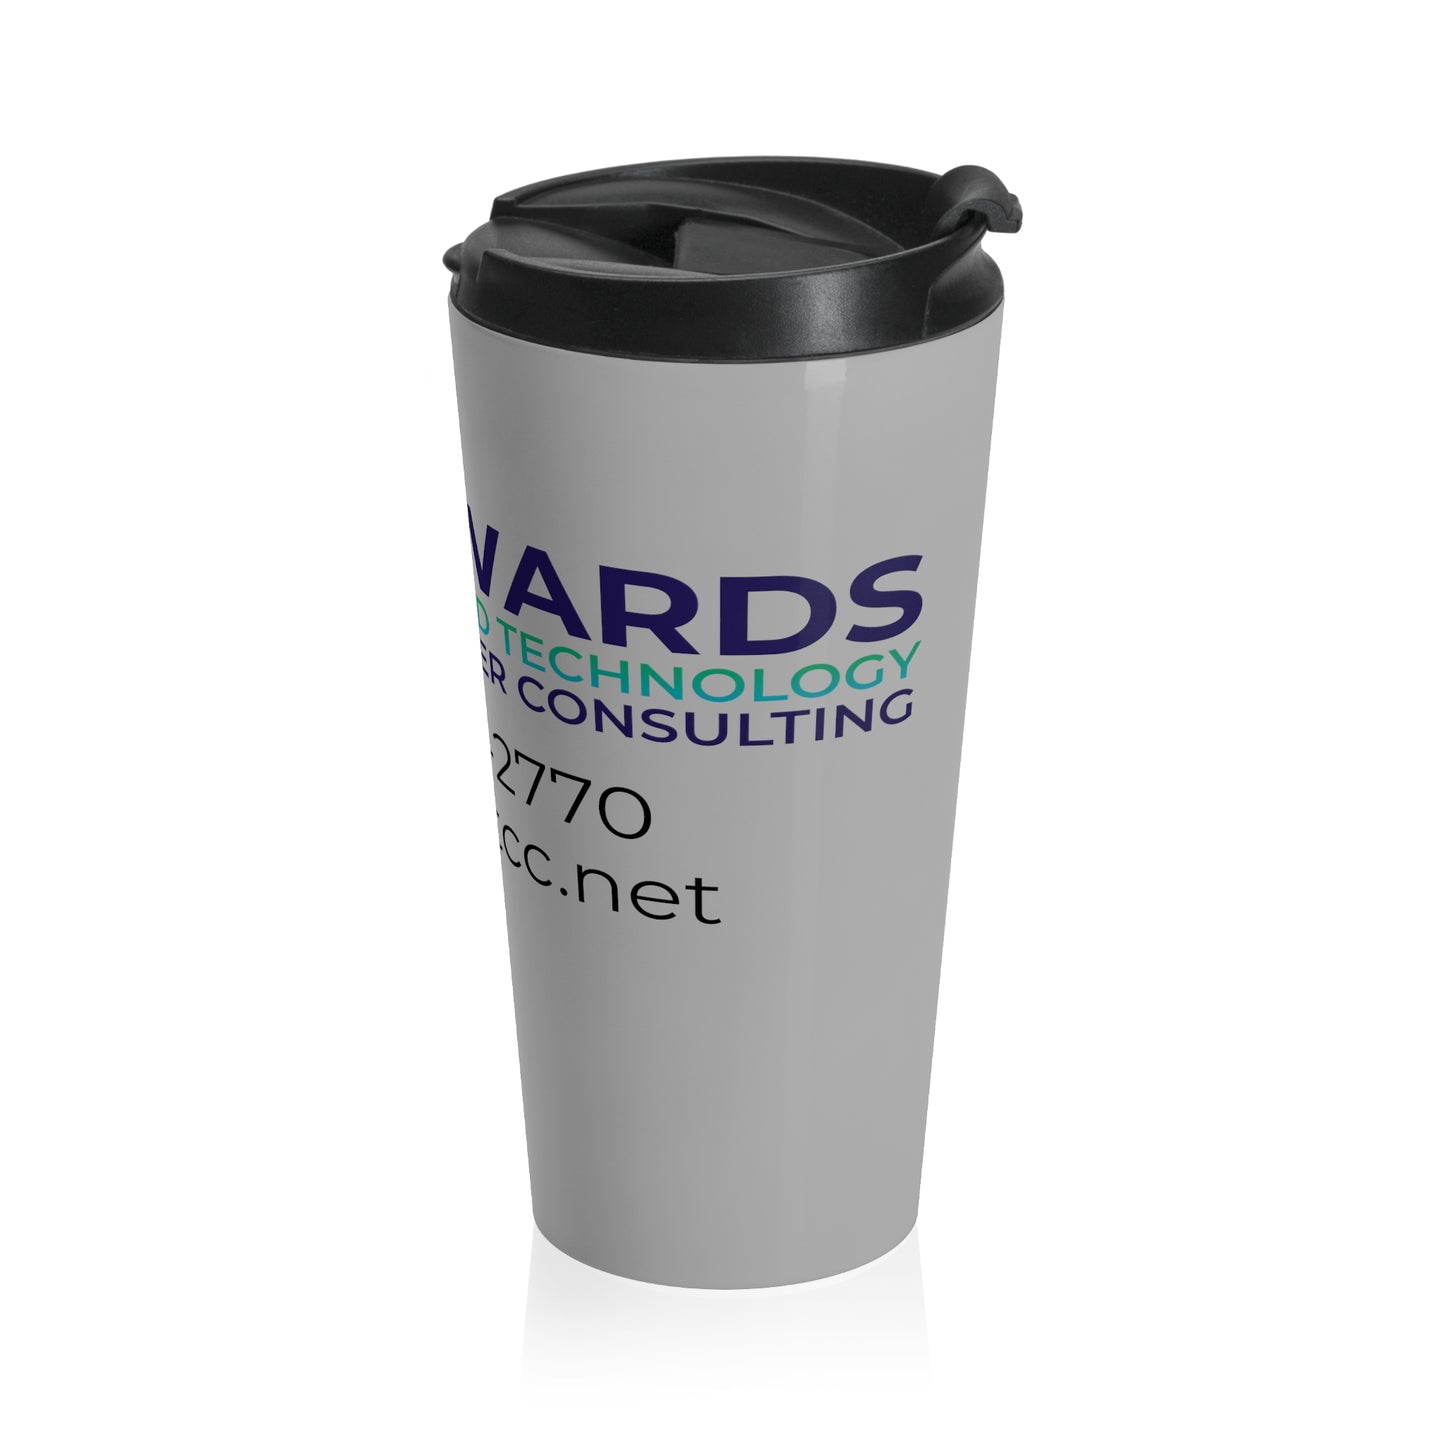 Edwards Managed Technology Computer Consulting Stainless Steel Travel Mug